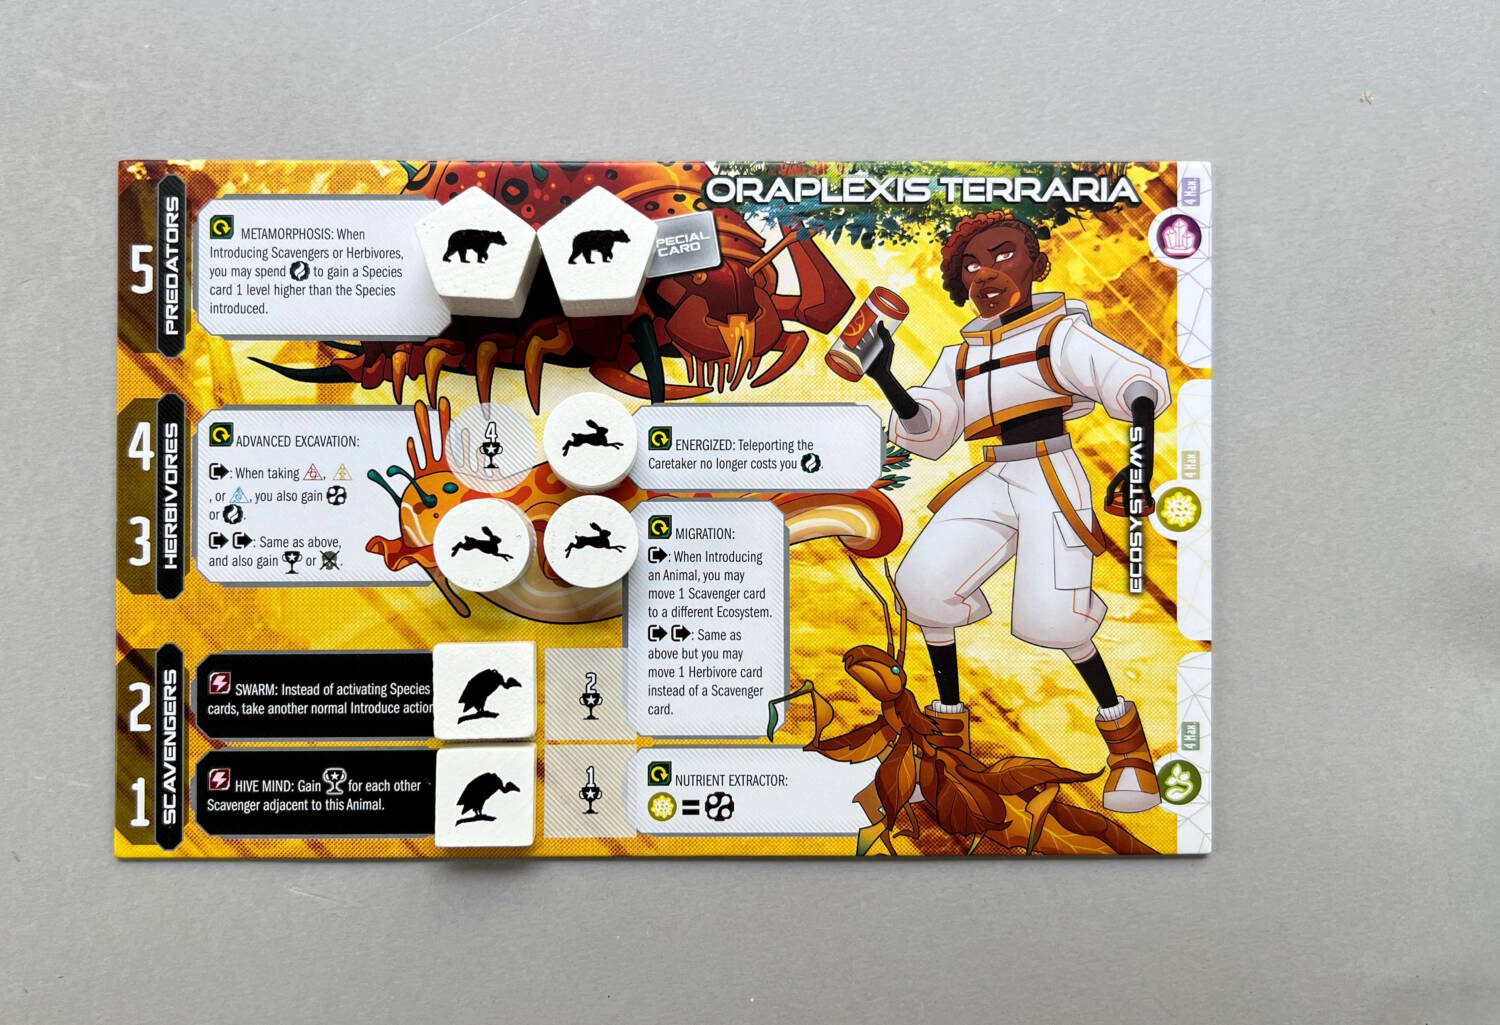 A Shaper board with three animals (two Scavengers and one Herbovore) placed on the board, revealing new abilities the player may use.